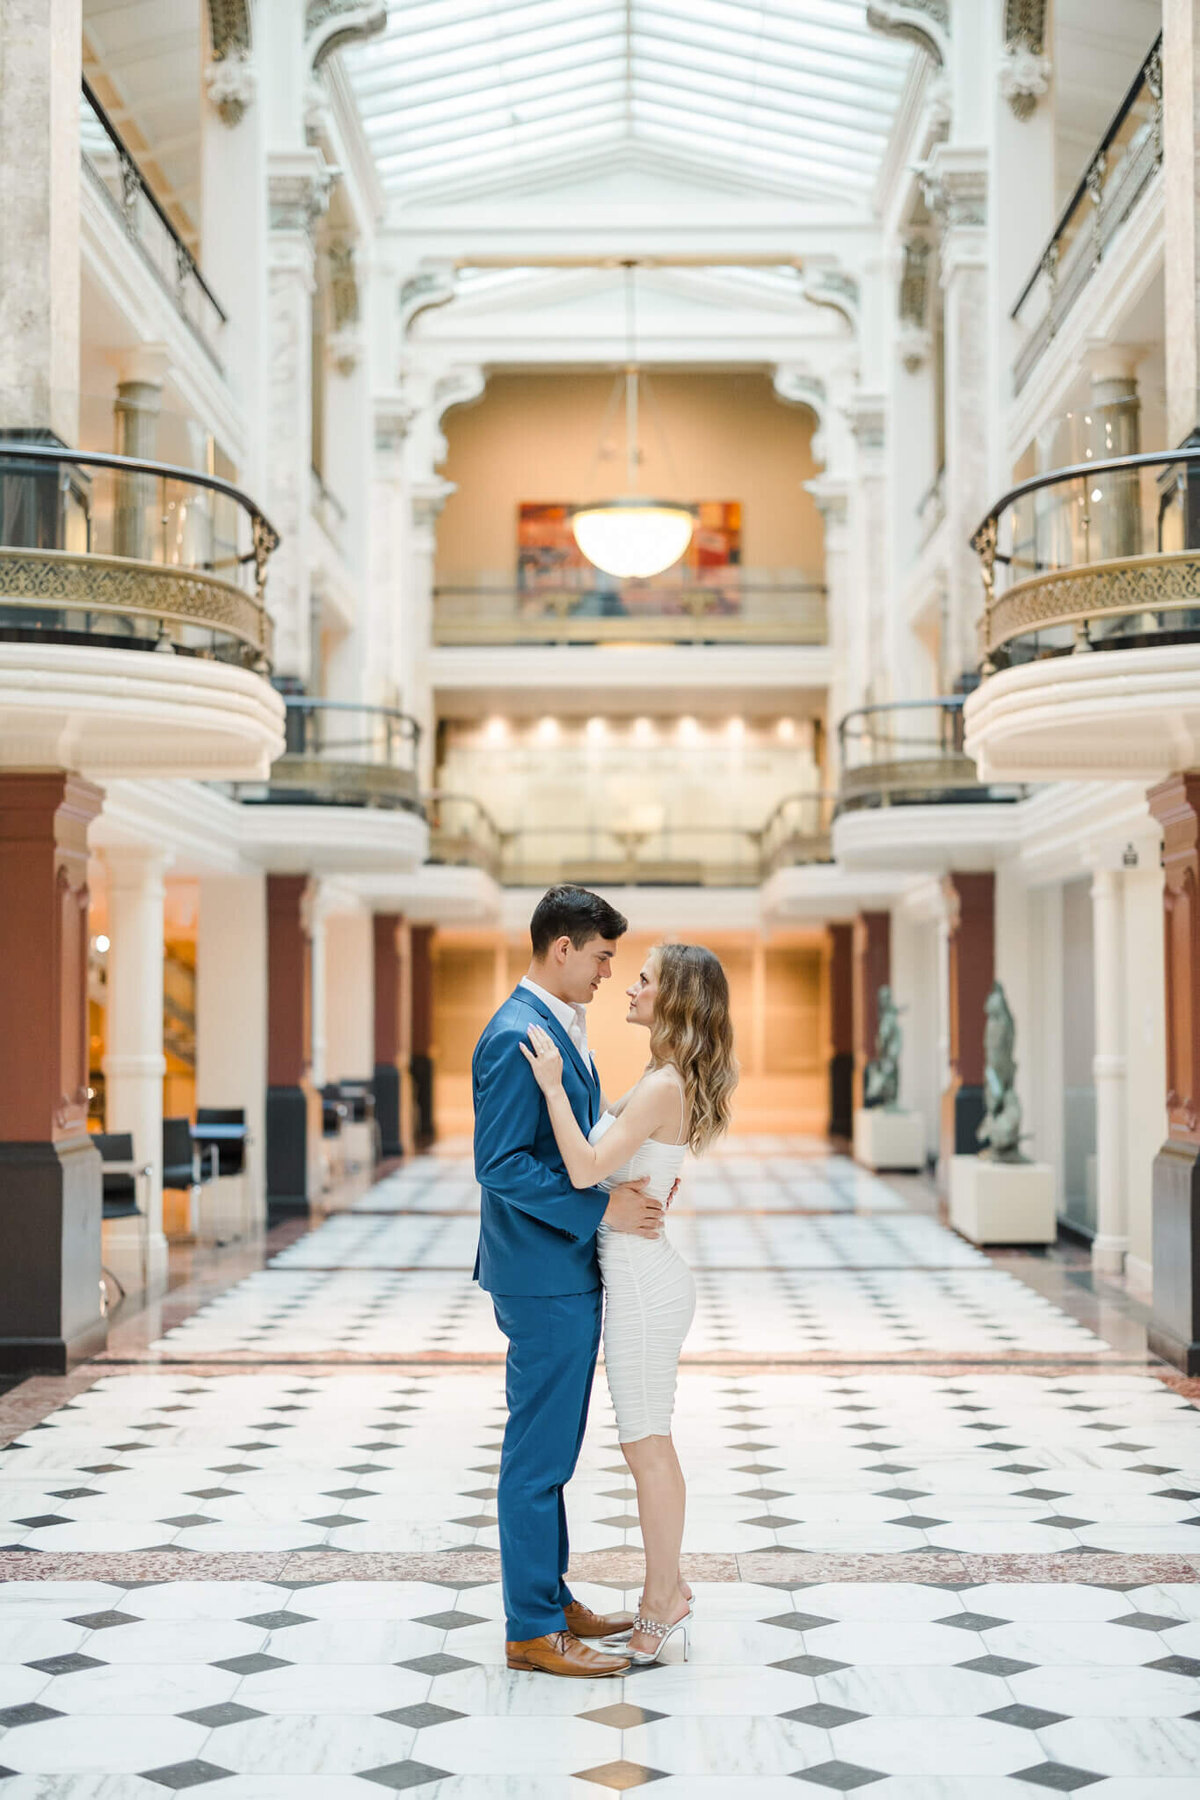 national-portrait-gallery-engagement-session-older-couple-light-airy-28-2